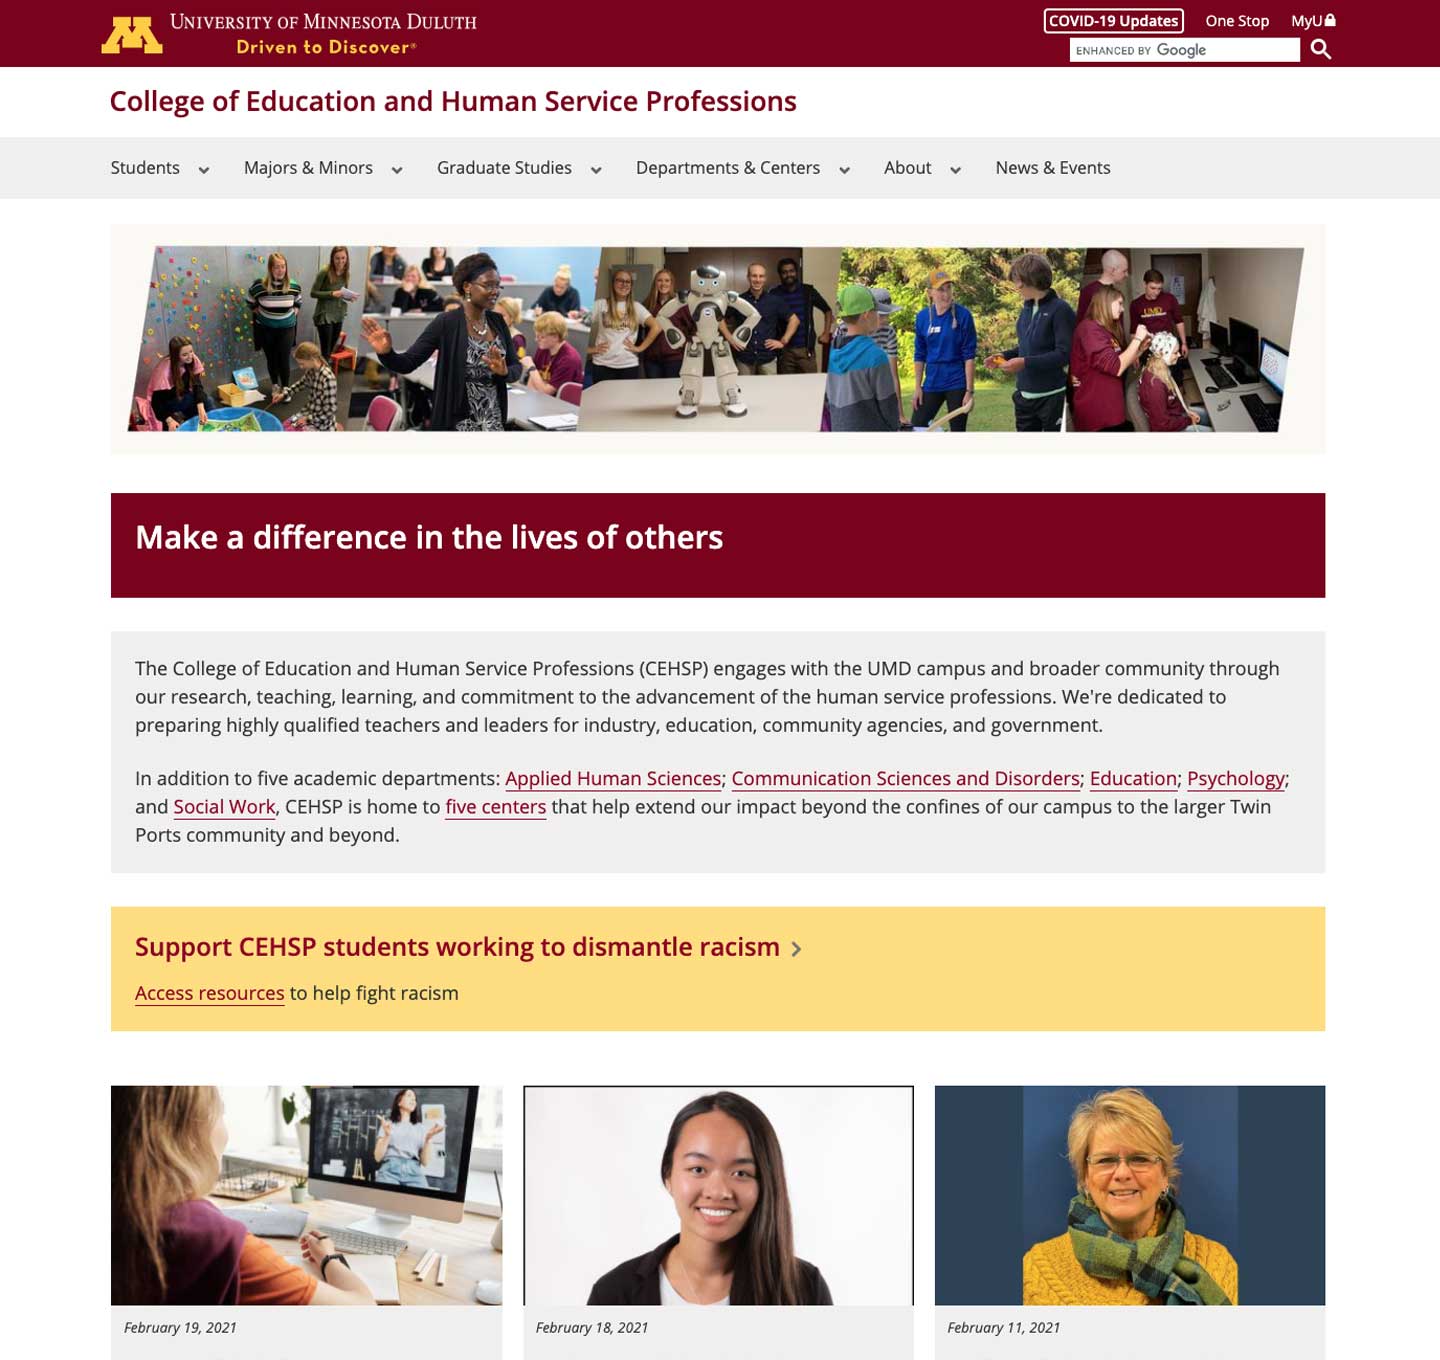 College of Education and Human Service Professions website home page